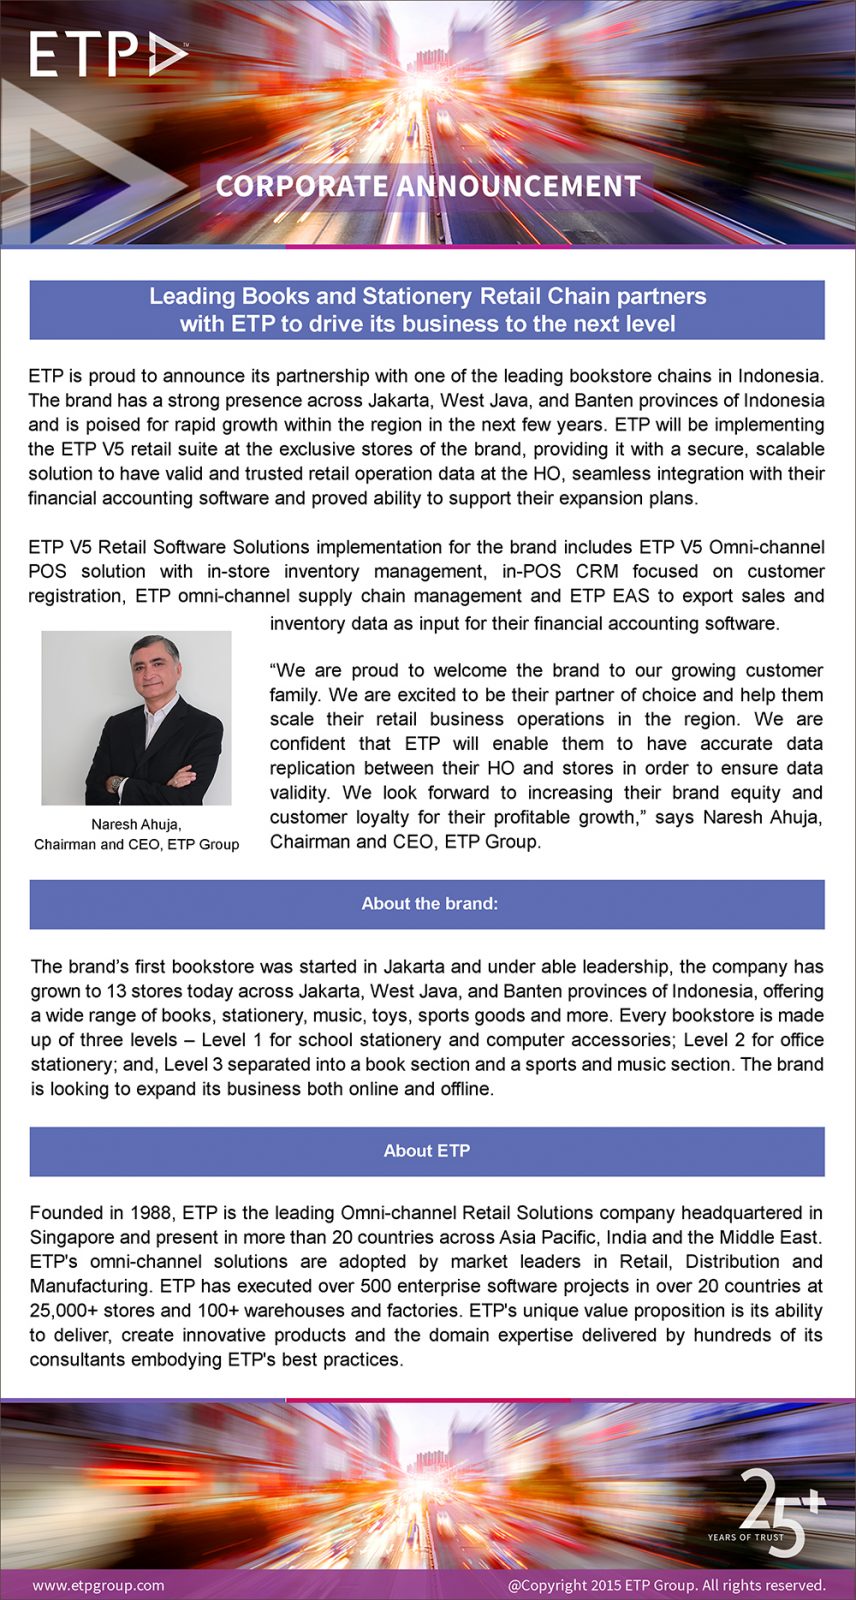 Leading Books and Stationery Retail Chain partners with ETP to drive its business to the next level